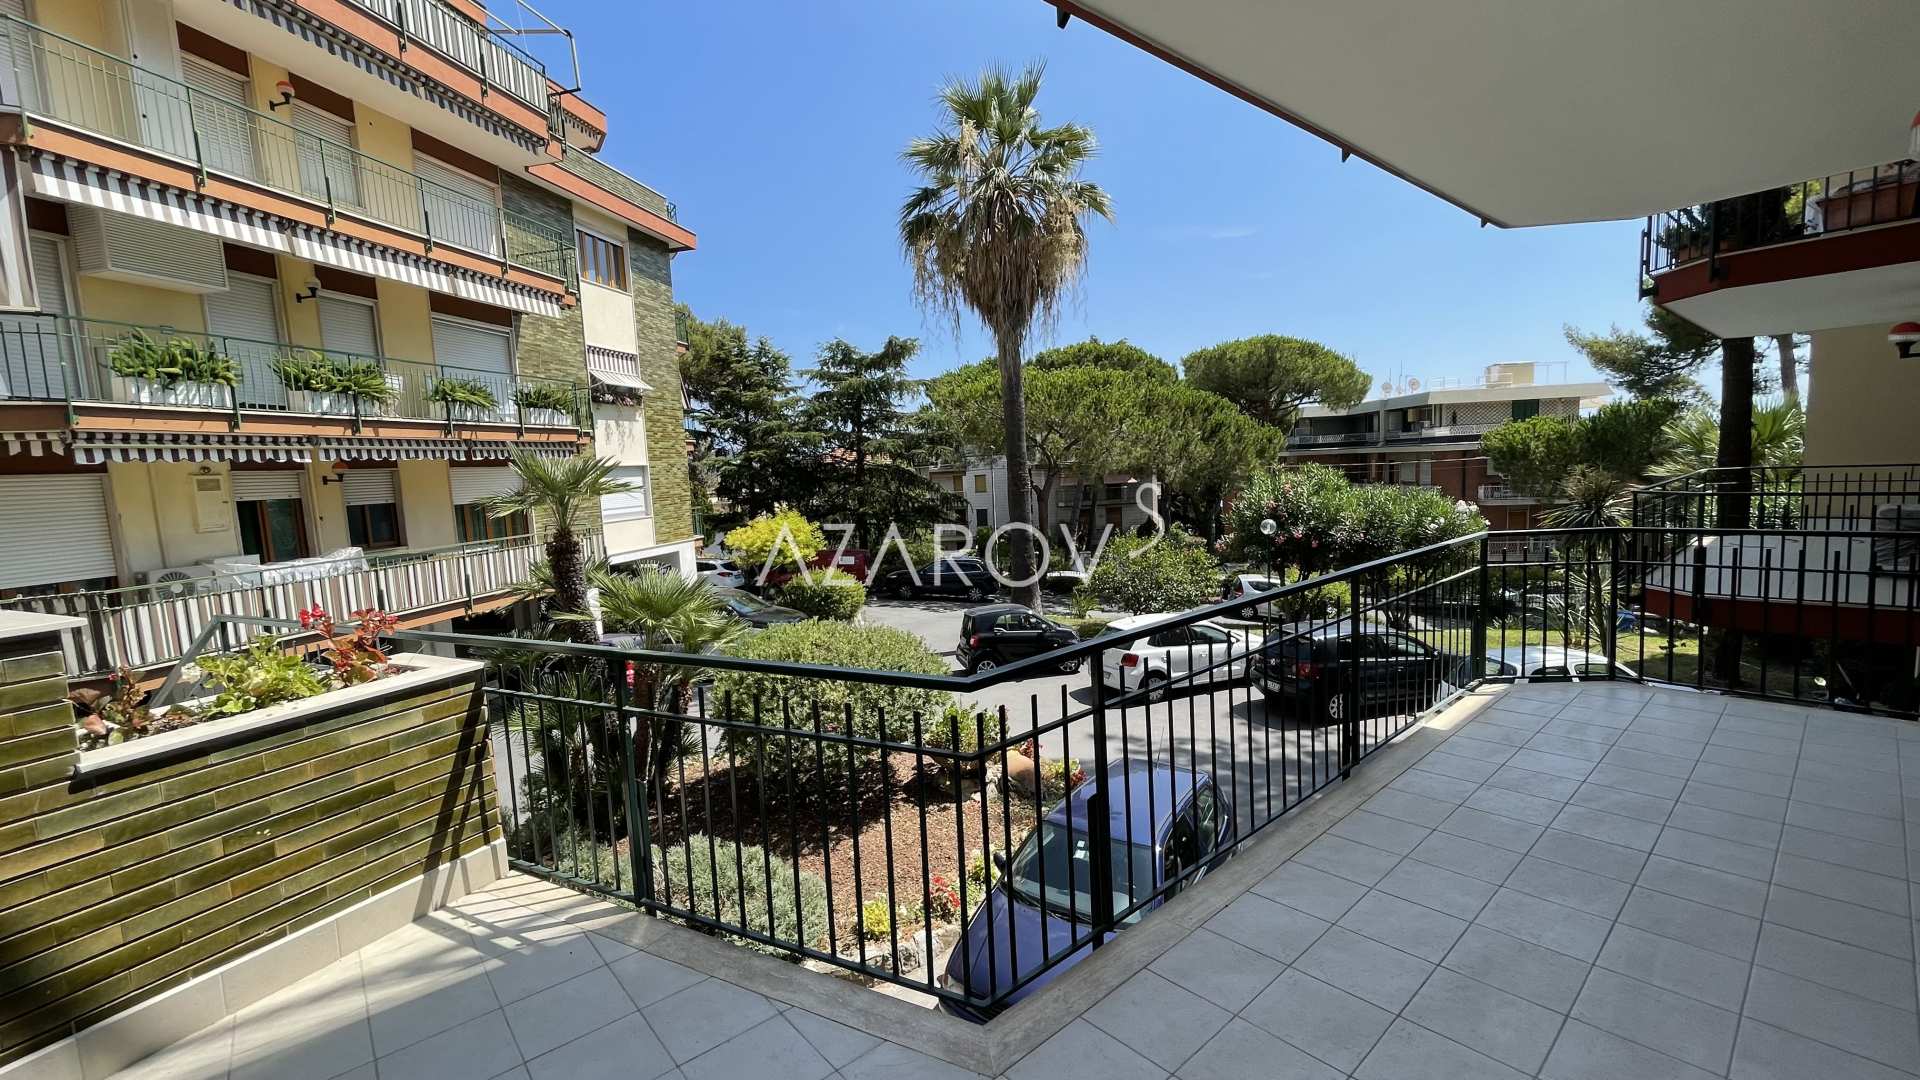 Appartement in San Remo 110 m2